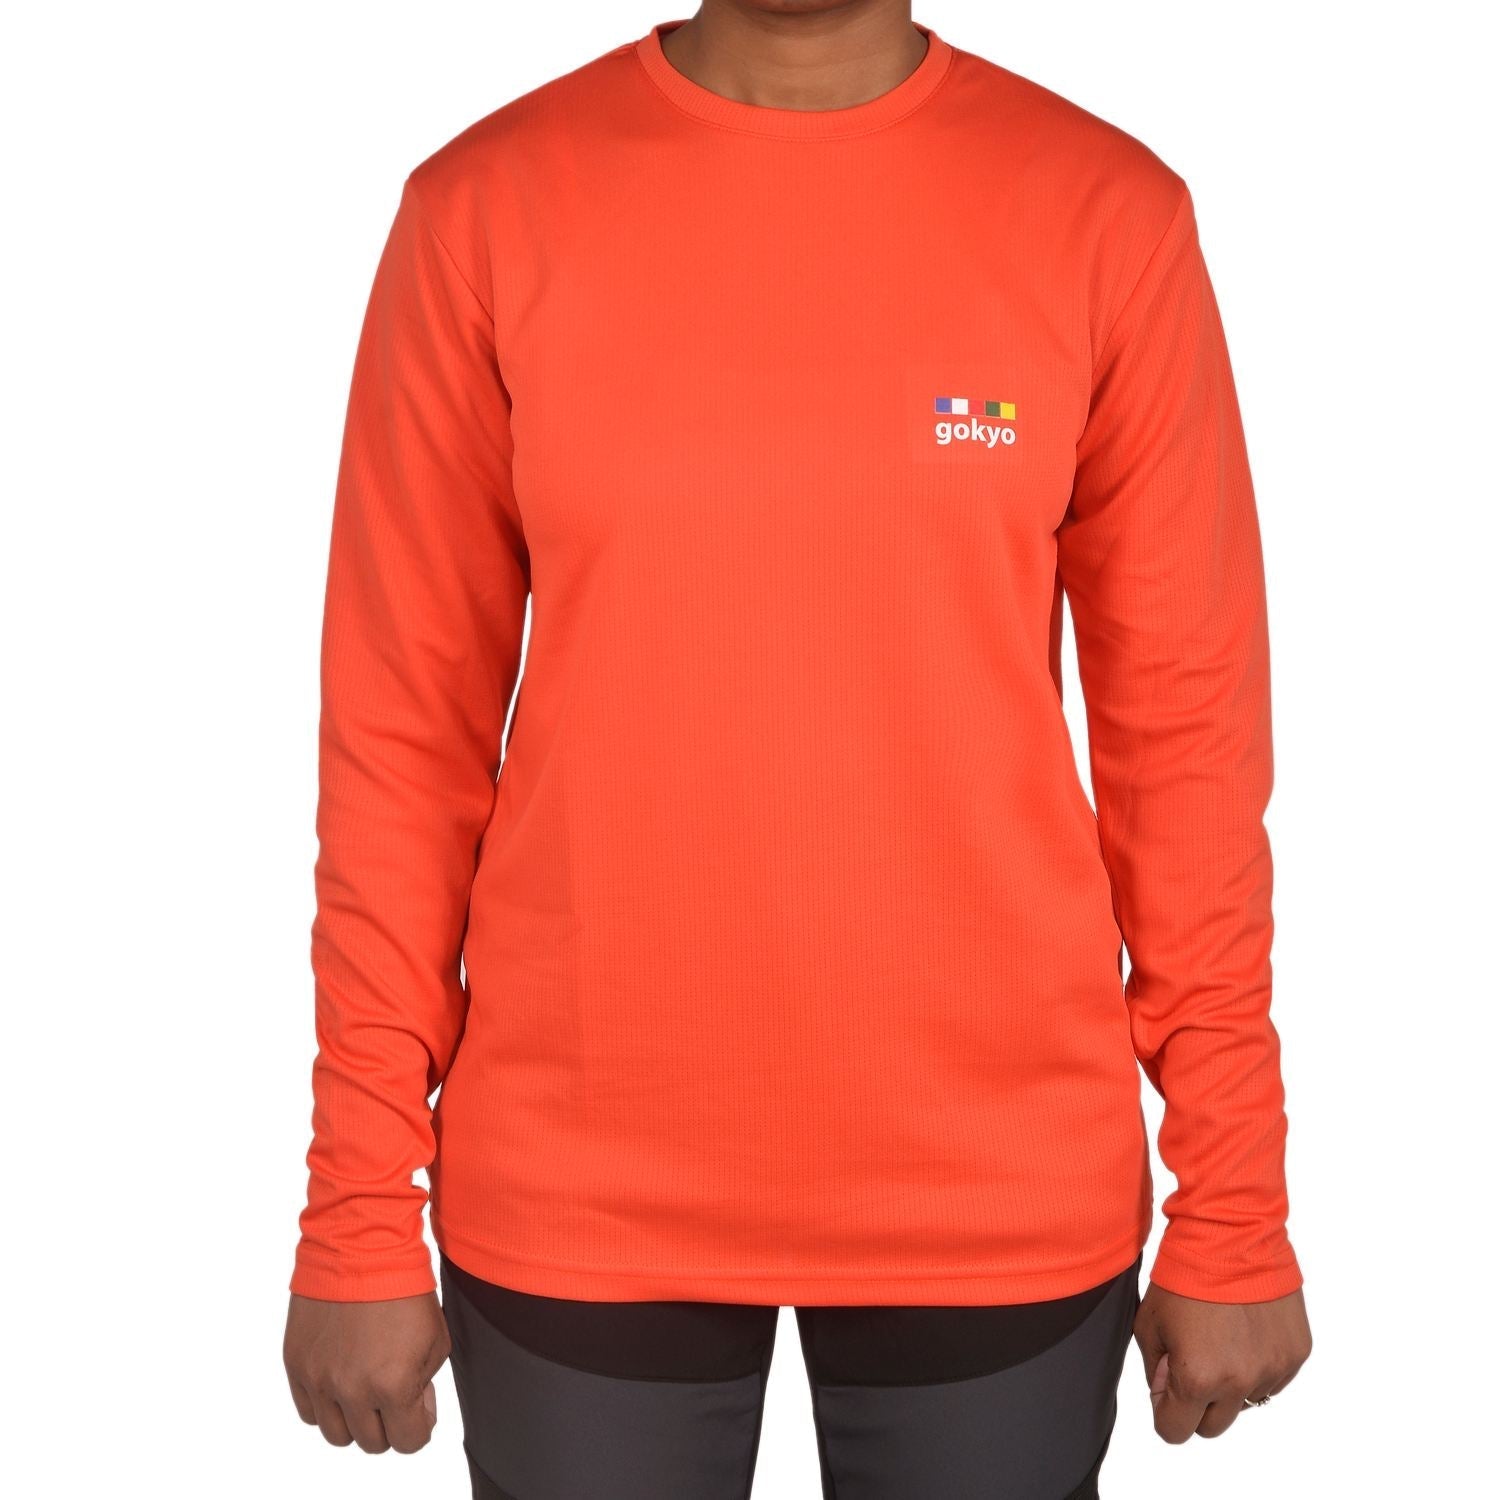 Buy Kailimpong Outdoor & Multipurpose Tshirt - Women Scarlet at Gokyo Outdoor Clothing & Gear